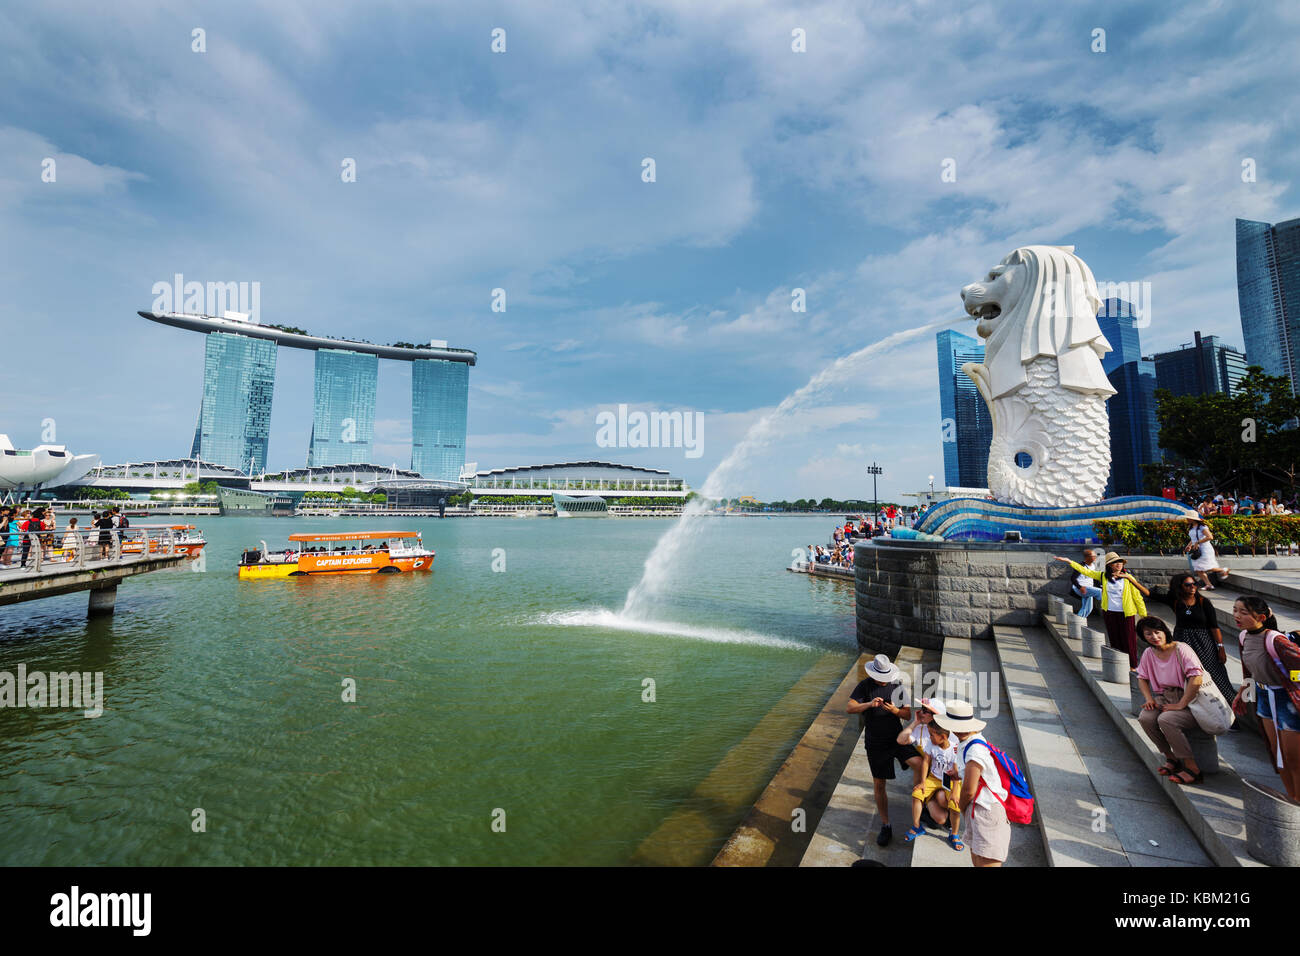 SINGAPORE - AUG 19, 2017 : The Merlion Park with tourists visited (famous landmark of Singapore) Stock Photo